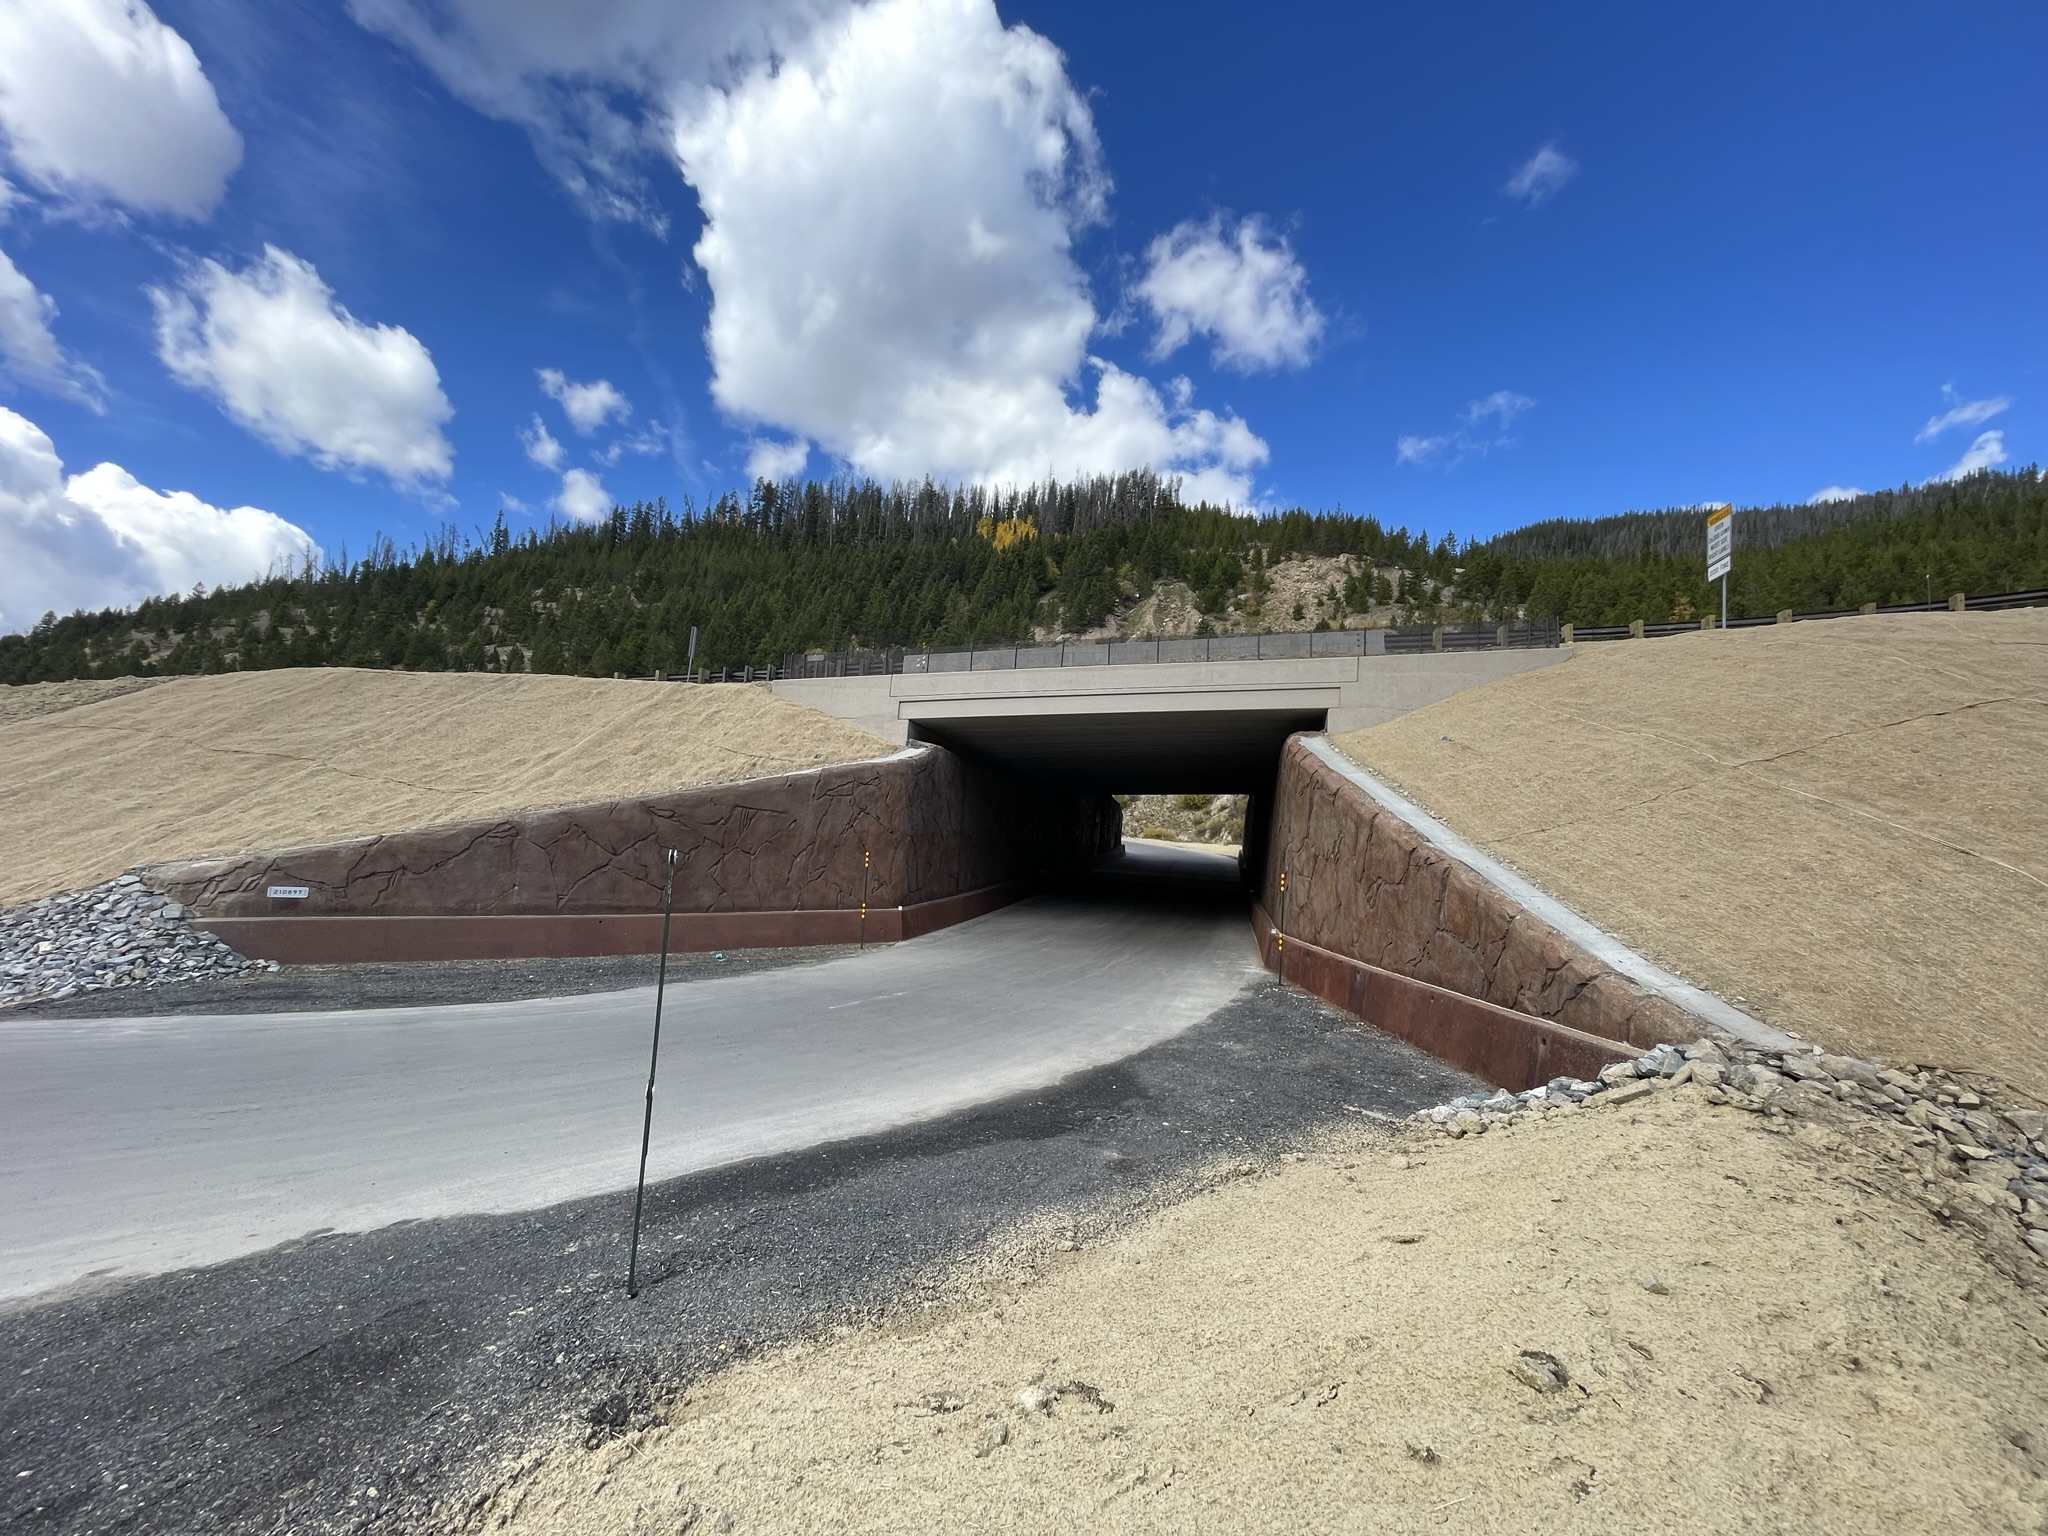 CDOT - I-70 Structure Replacement Project - Complete - 1.JPEG detail image